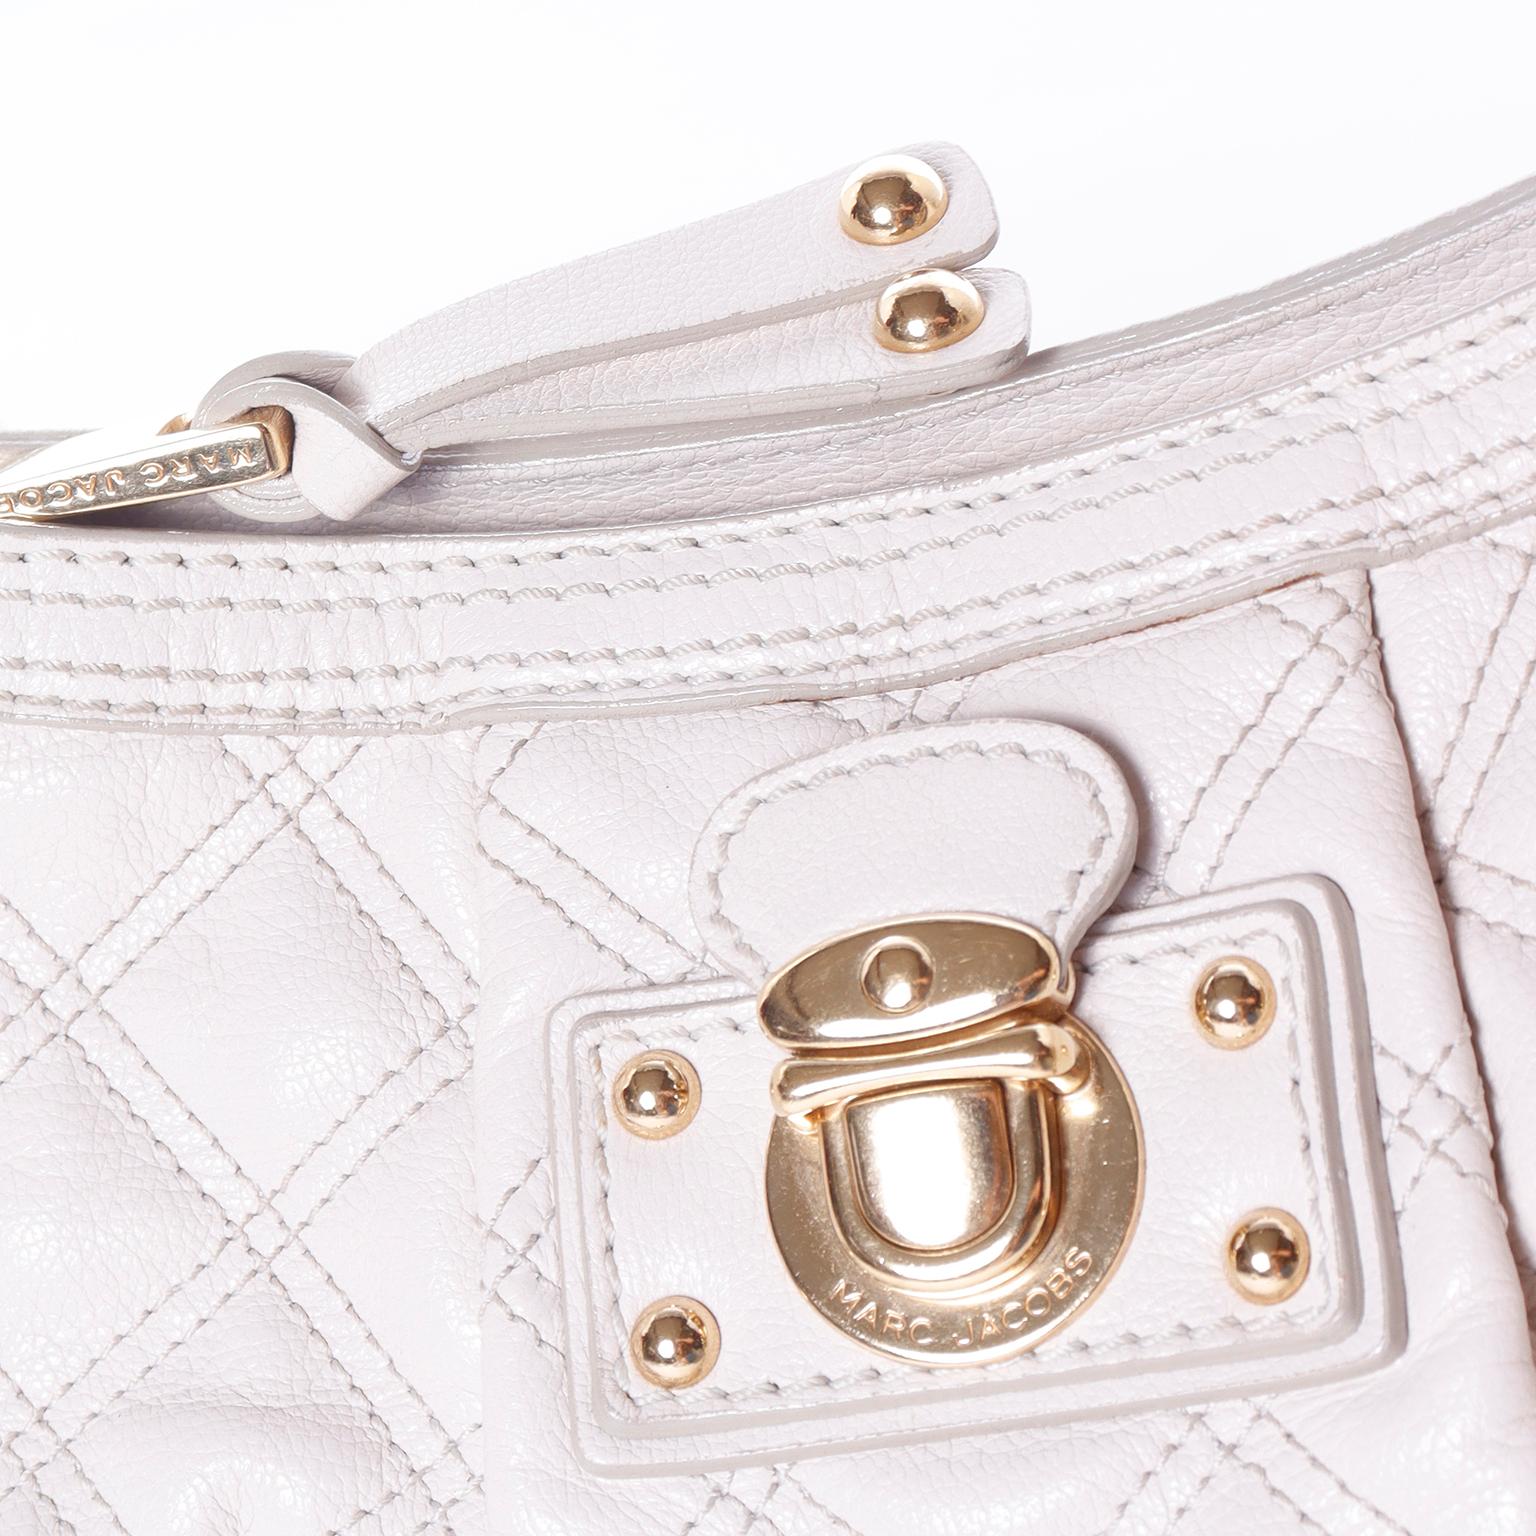 Marc Jacobs Handbag Bone Quilted Leather Zip Top Hobo Bag With Gold Chain Strap For Sale 2